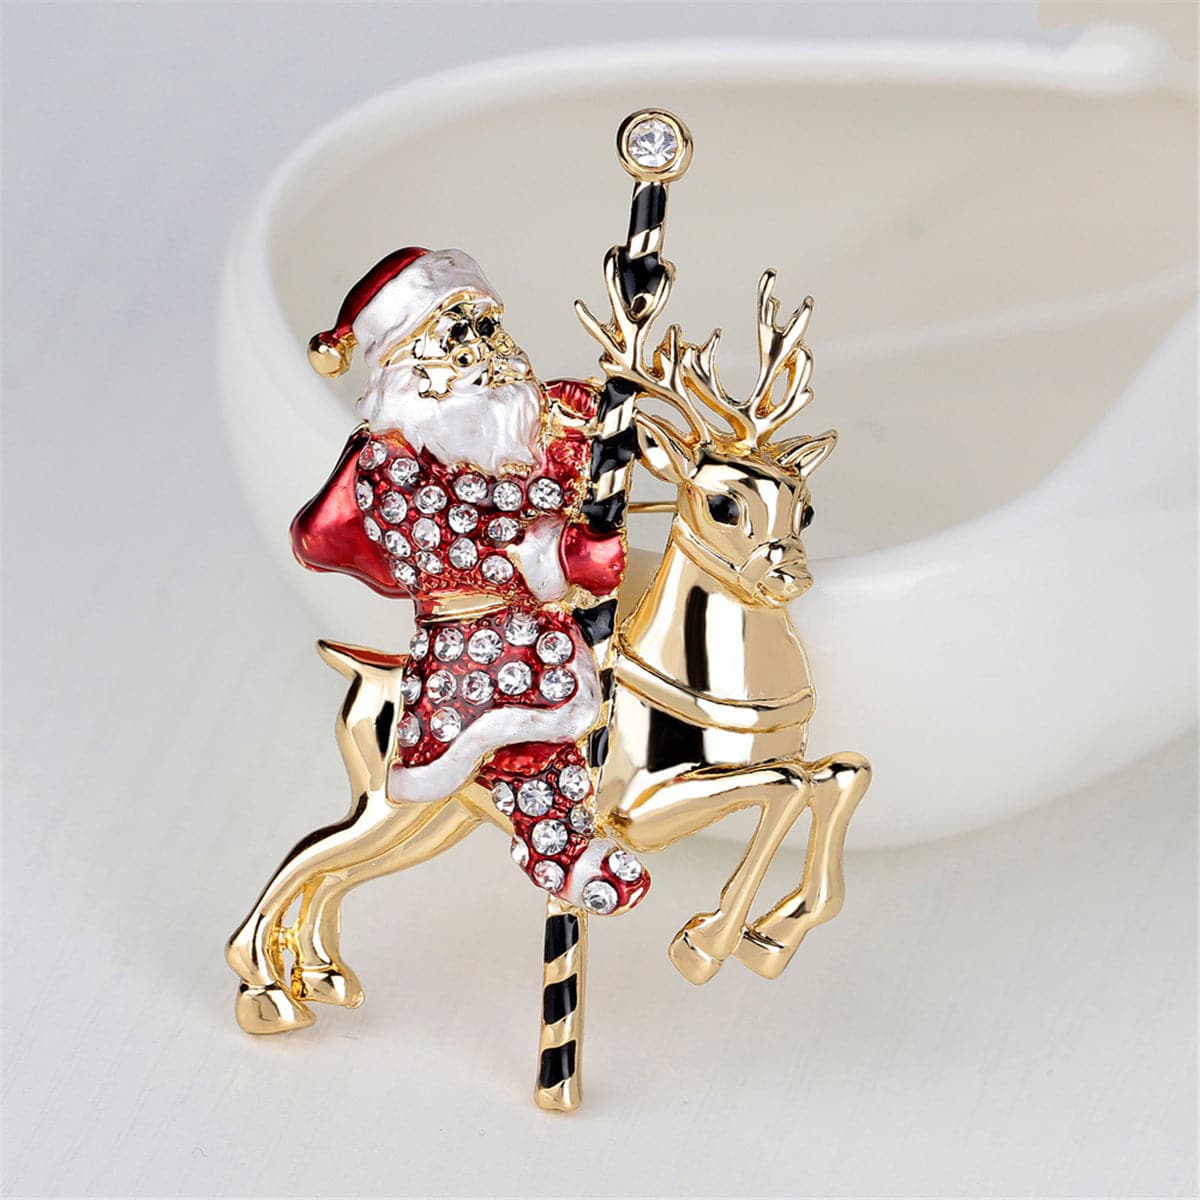 Professional Quality Santa Claus Accessories  Santa's Special Reindeer  Buttons/Pebbled Finish